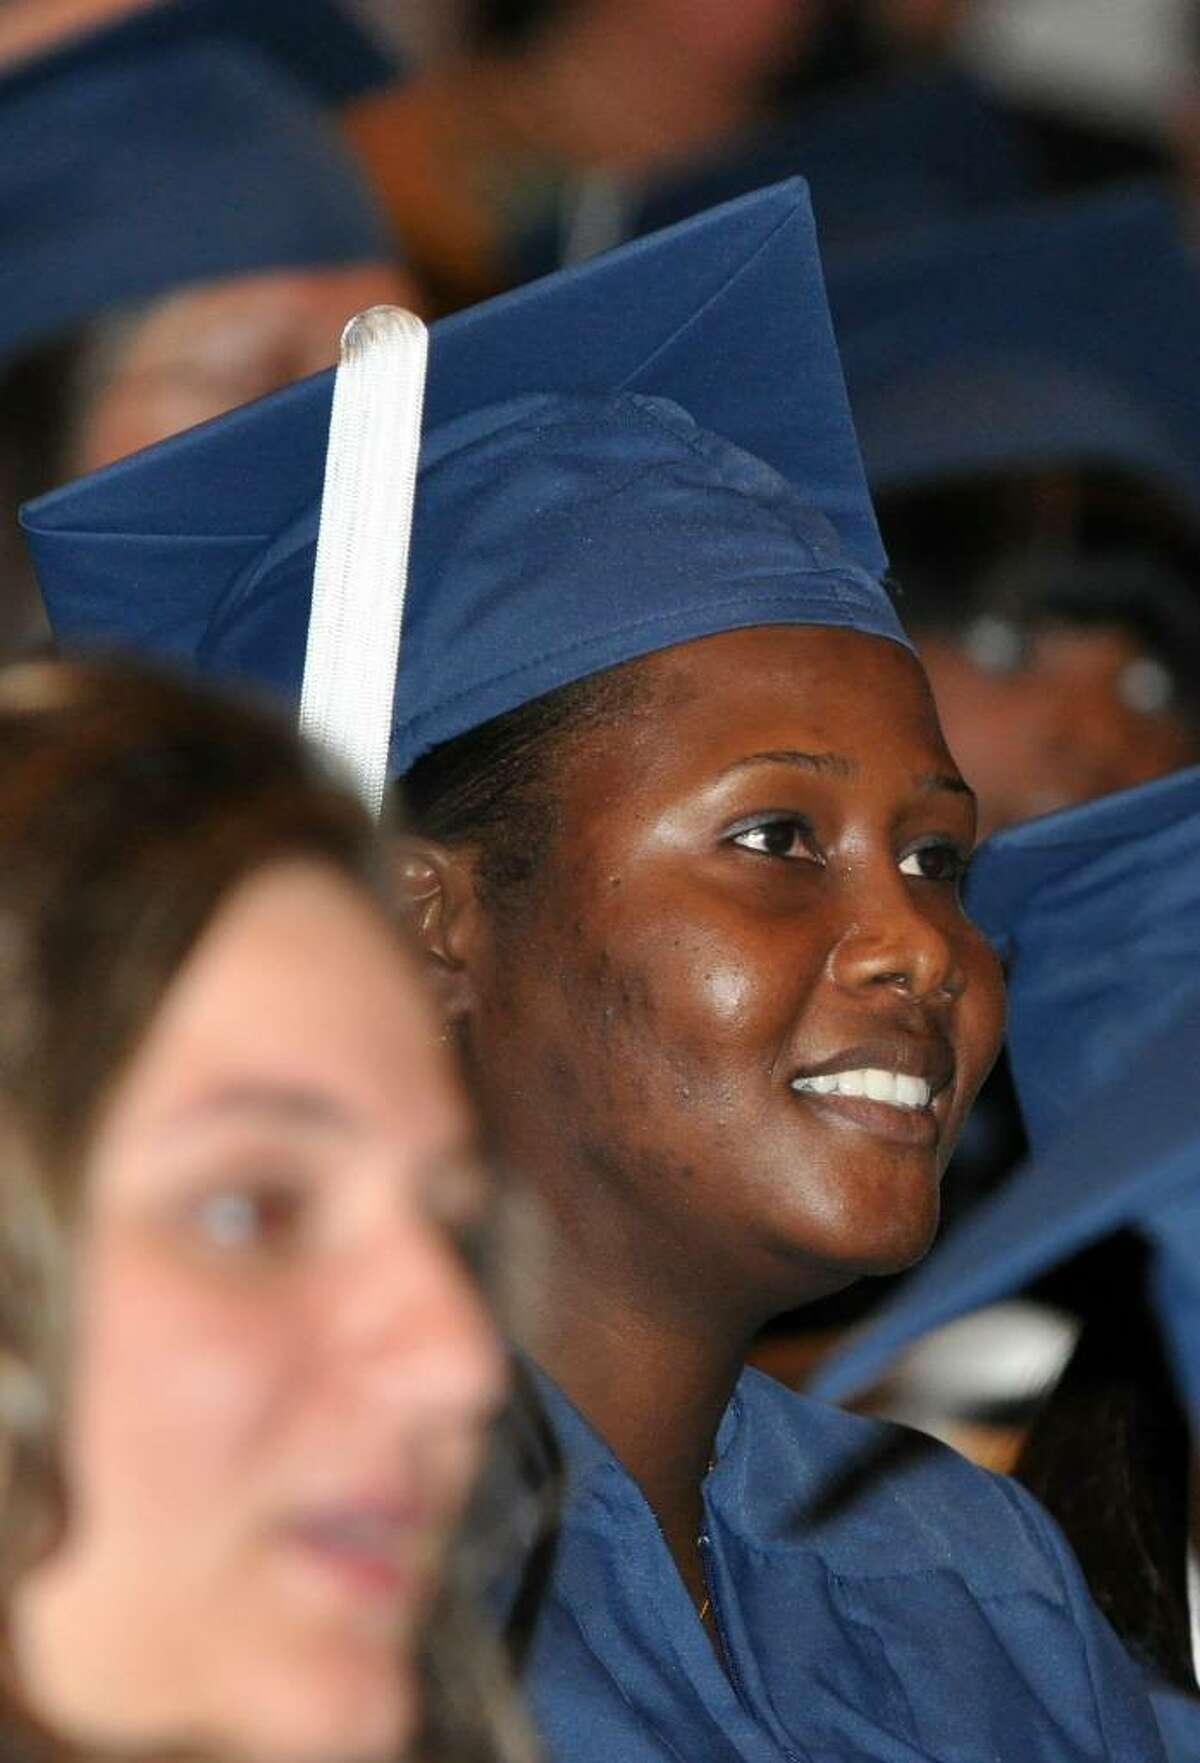 Darline Gaspard, of Stratford, listens during the 2010 St. Vincent's College Commencement Ceremony held at the Regina A. Quick Center at Fairfield University on Friday, May 21, 2010.